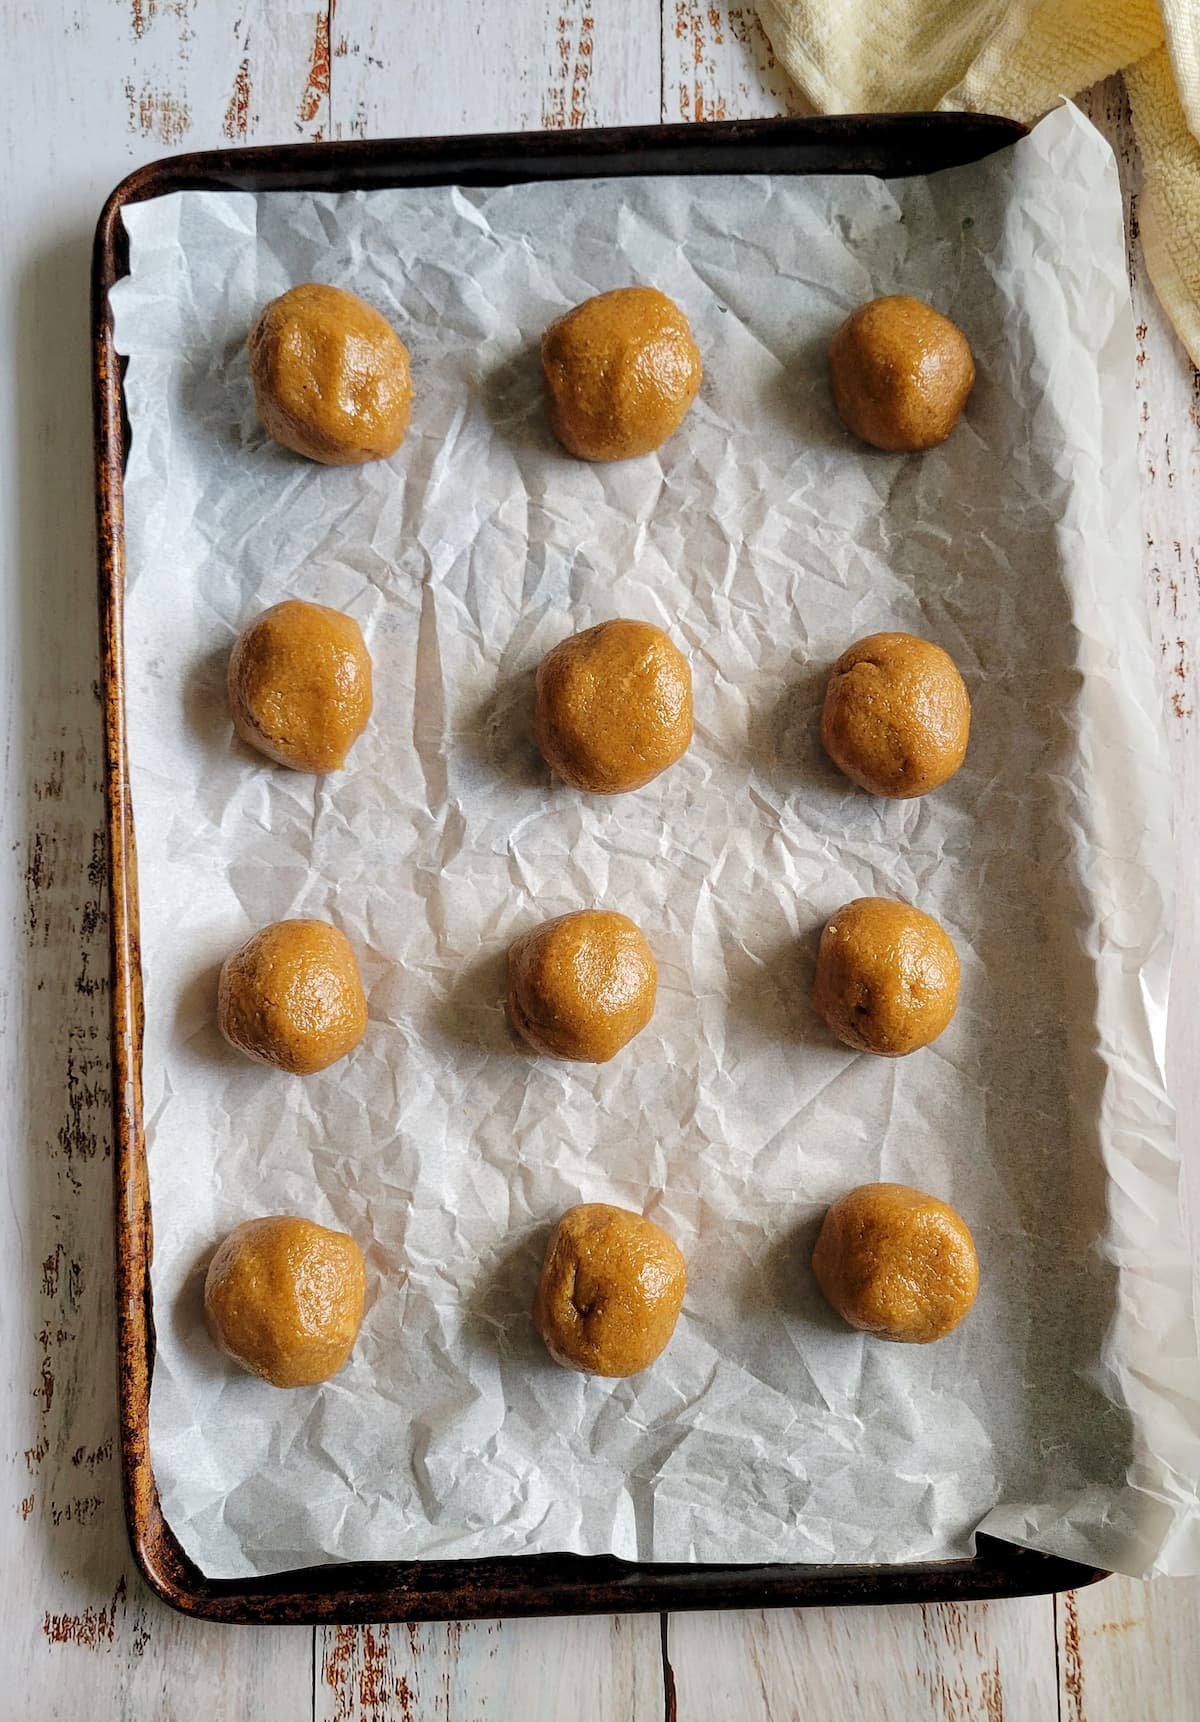 12 balls of cookie dough spread out evenly on a parchment lined baking sheet